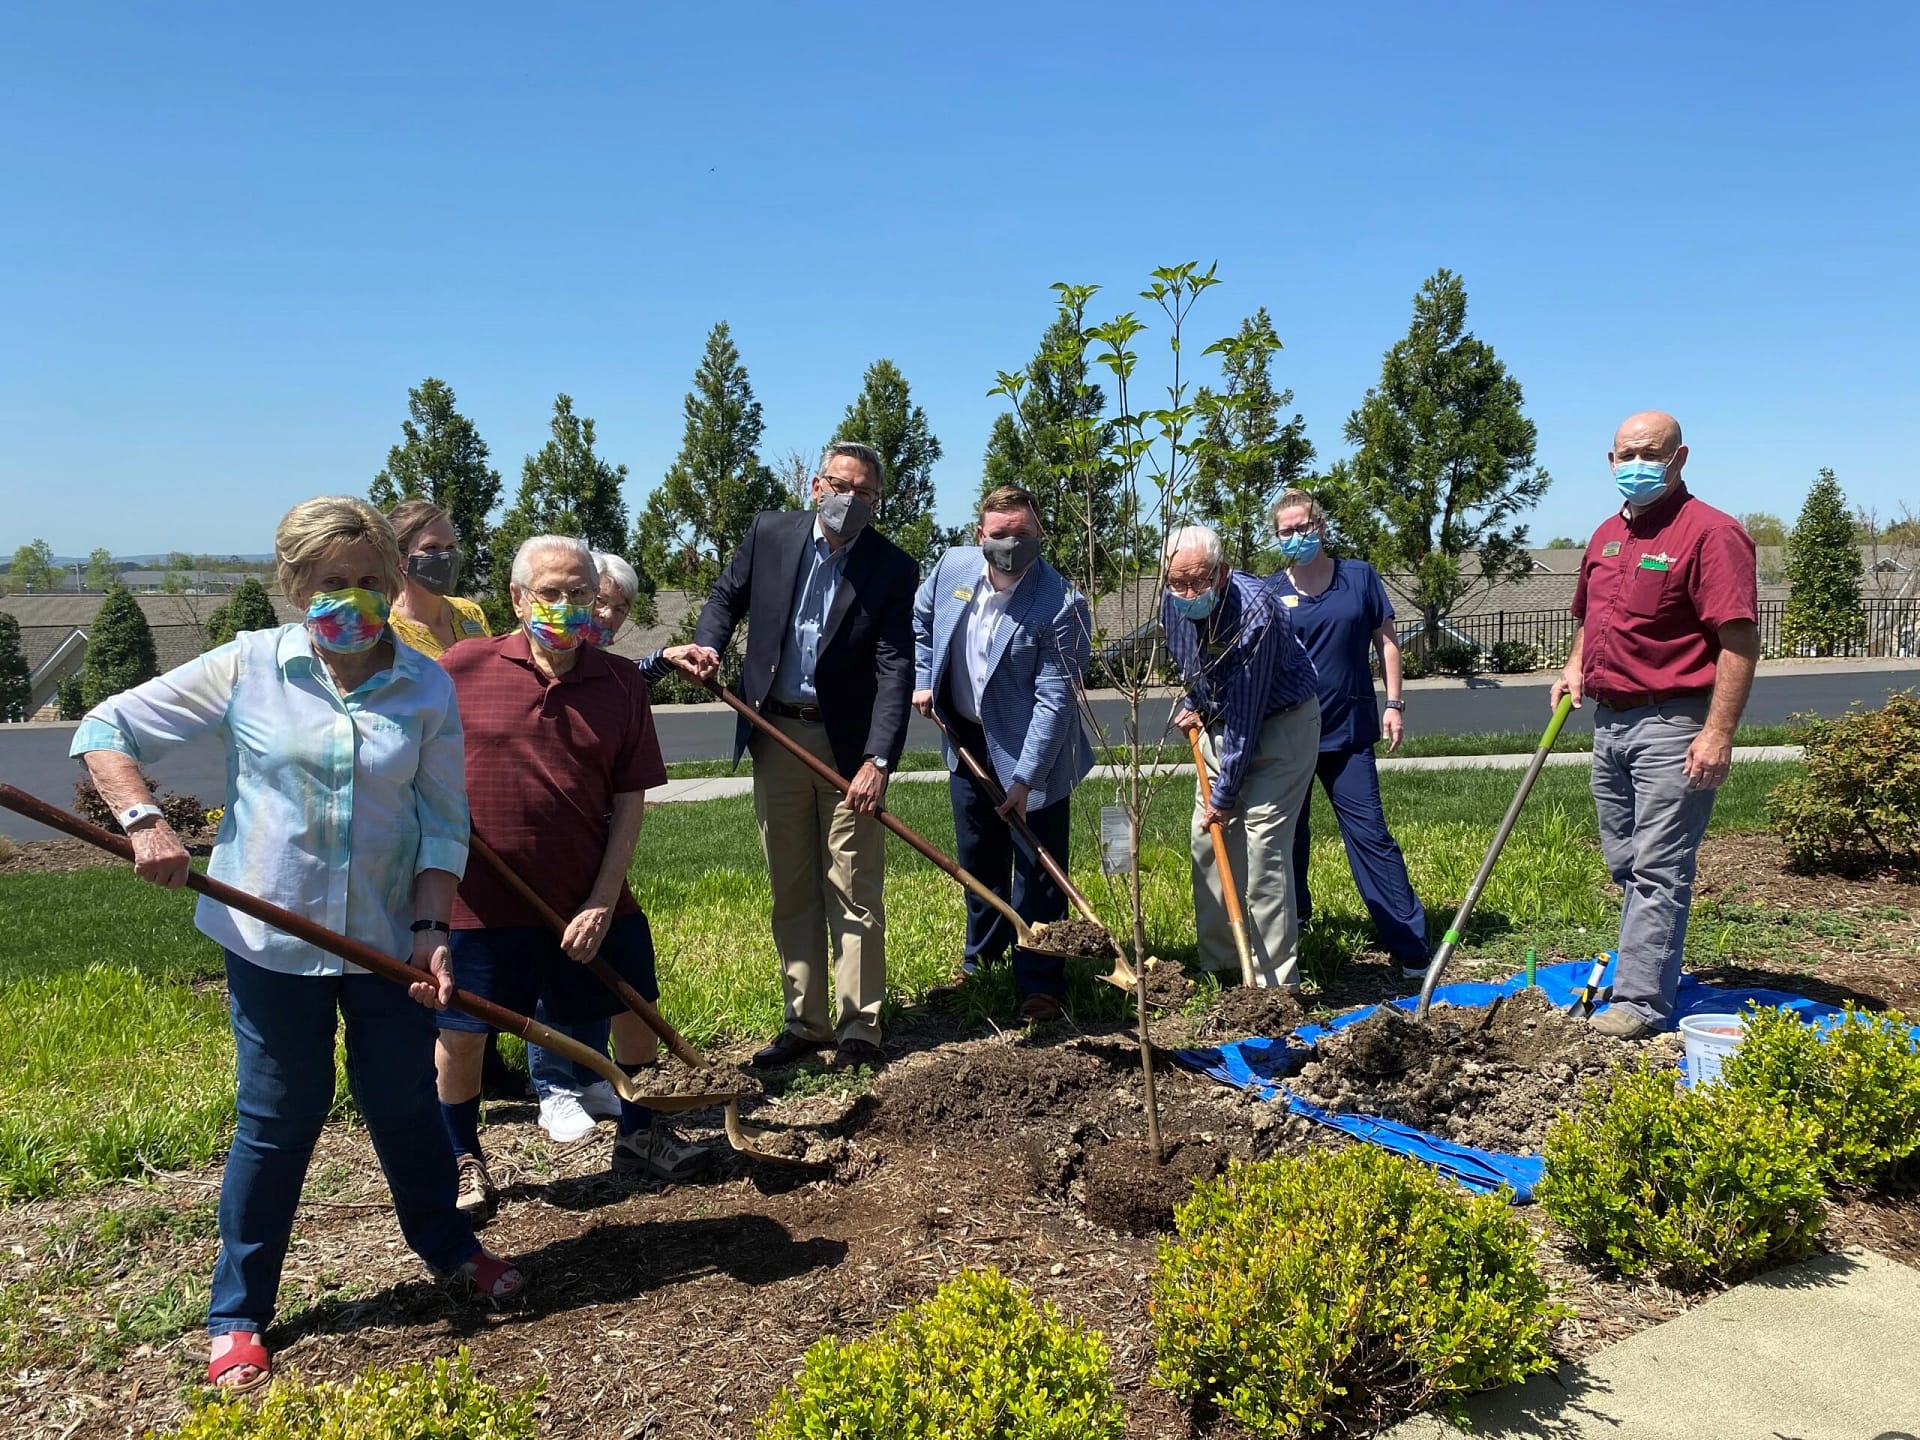 Group of residents and caregivers planting trees together